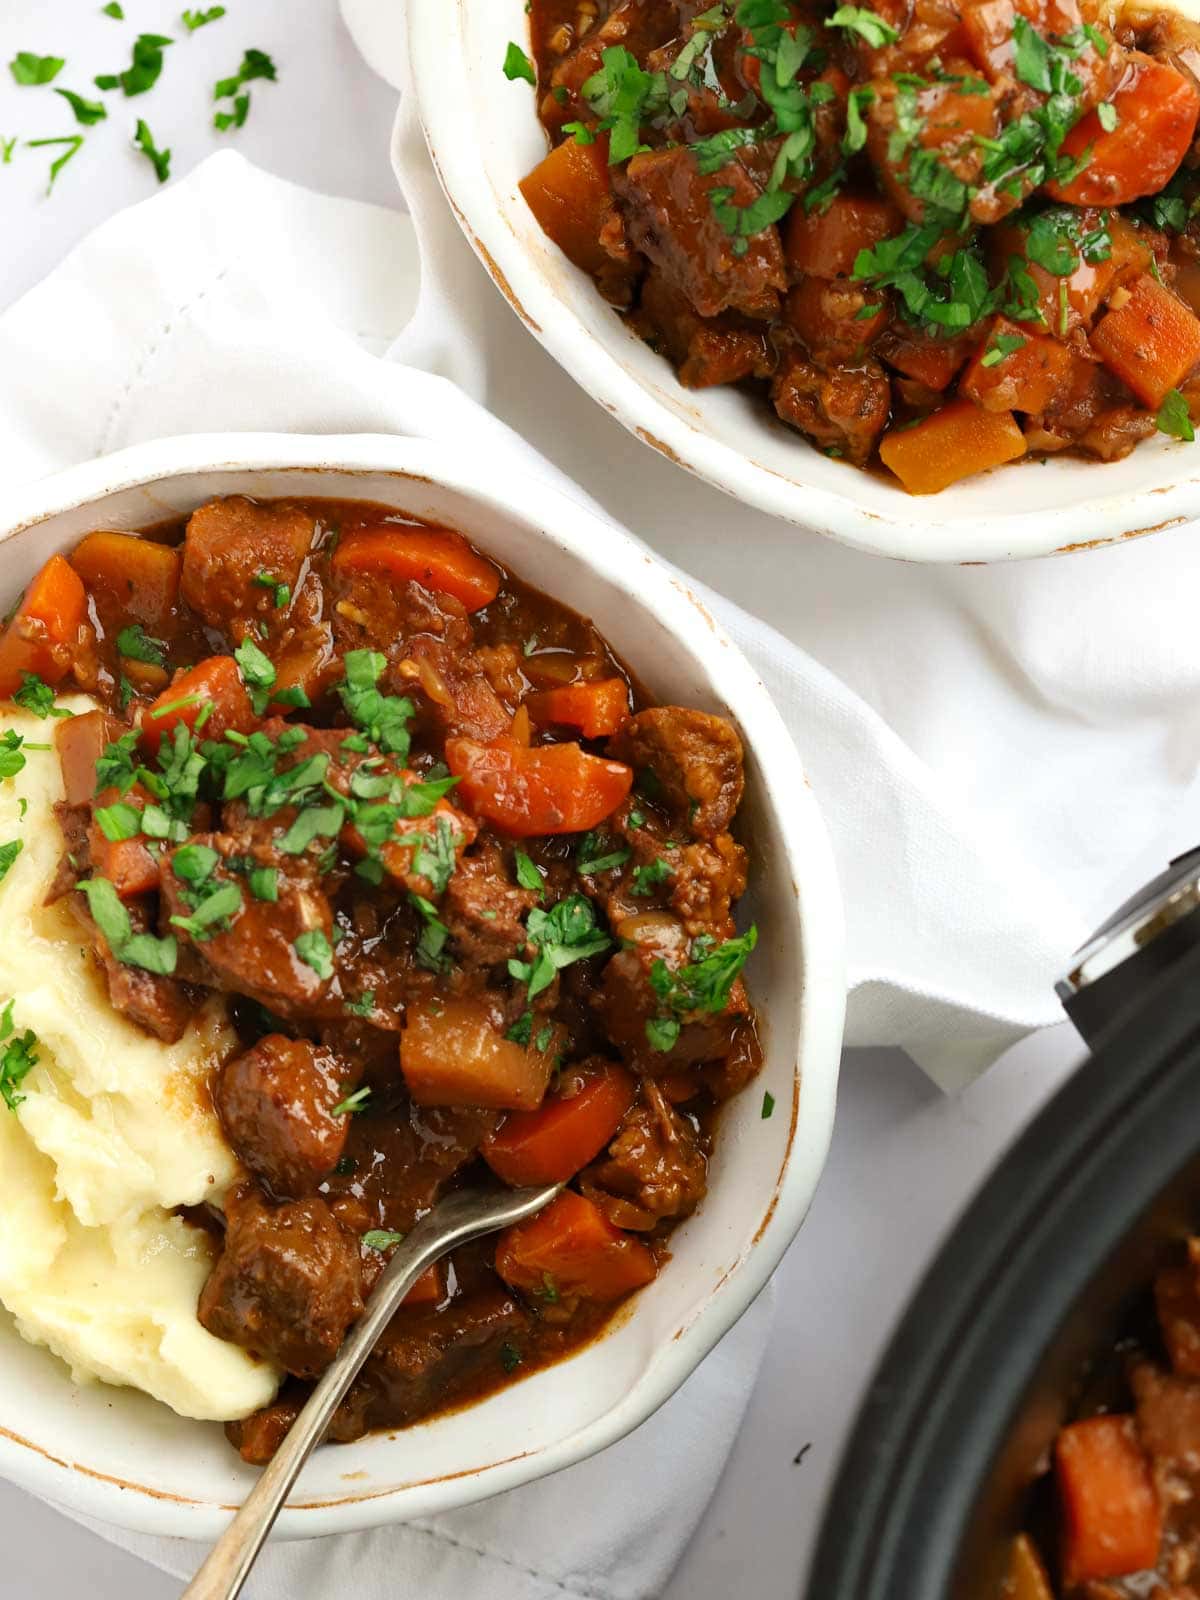 Slow Cooker Beef Casserole with vegetables and gravy comfort food